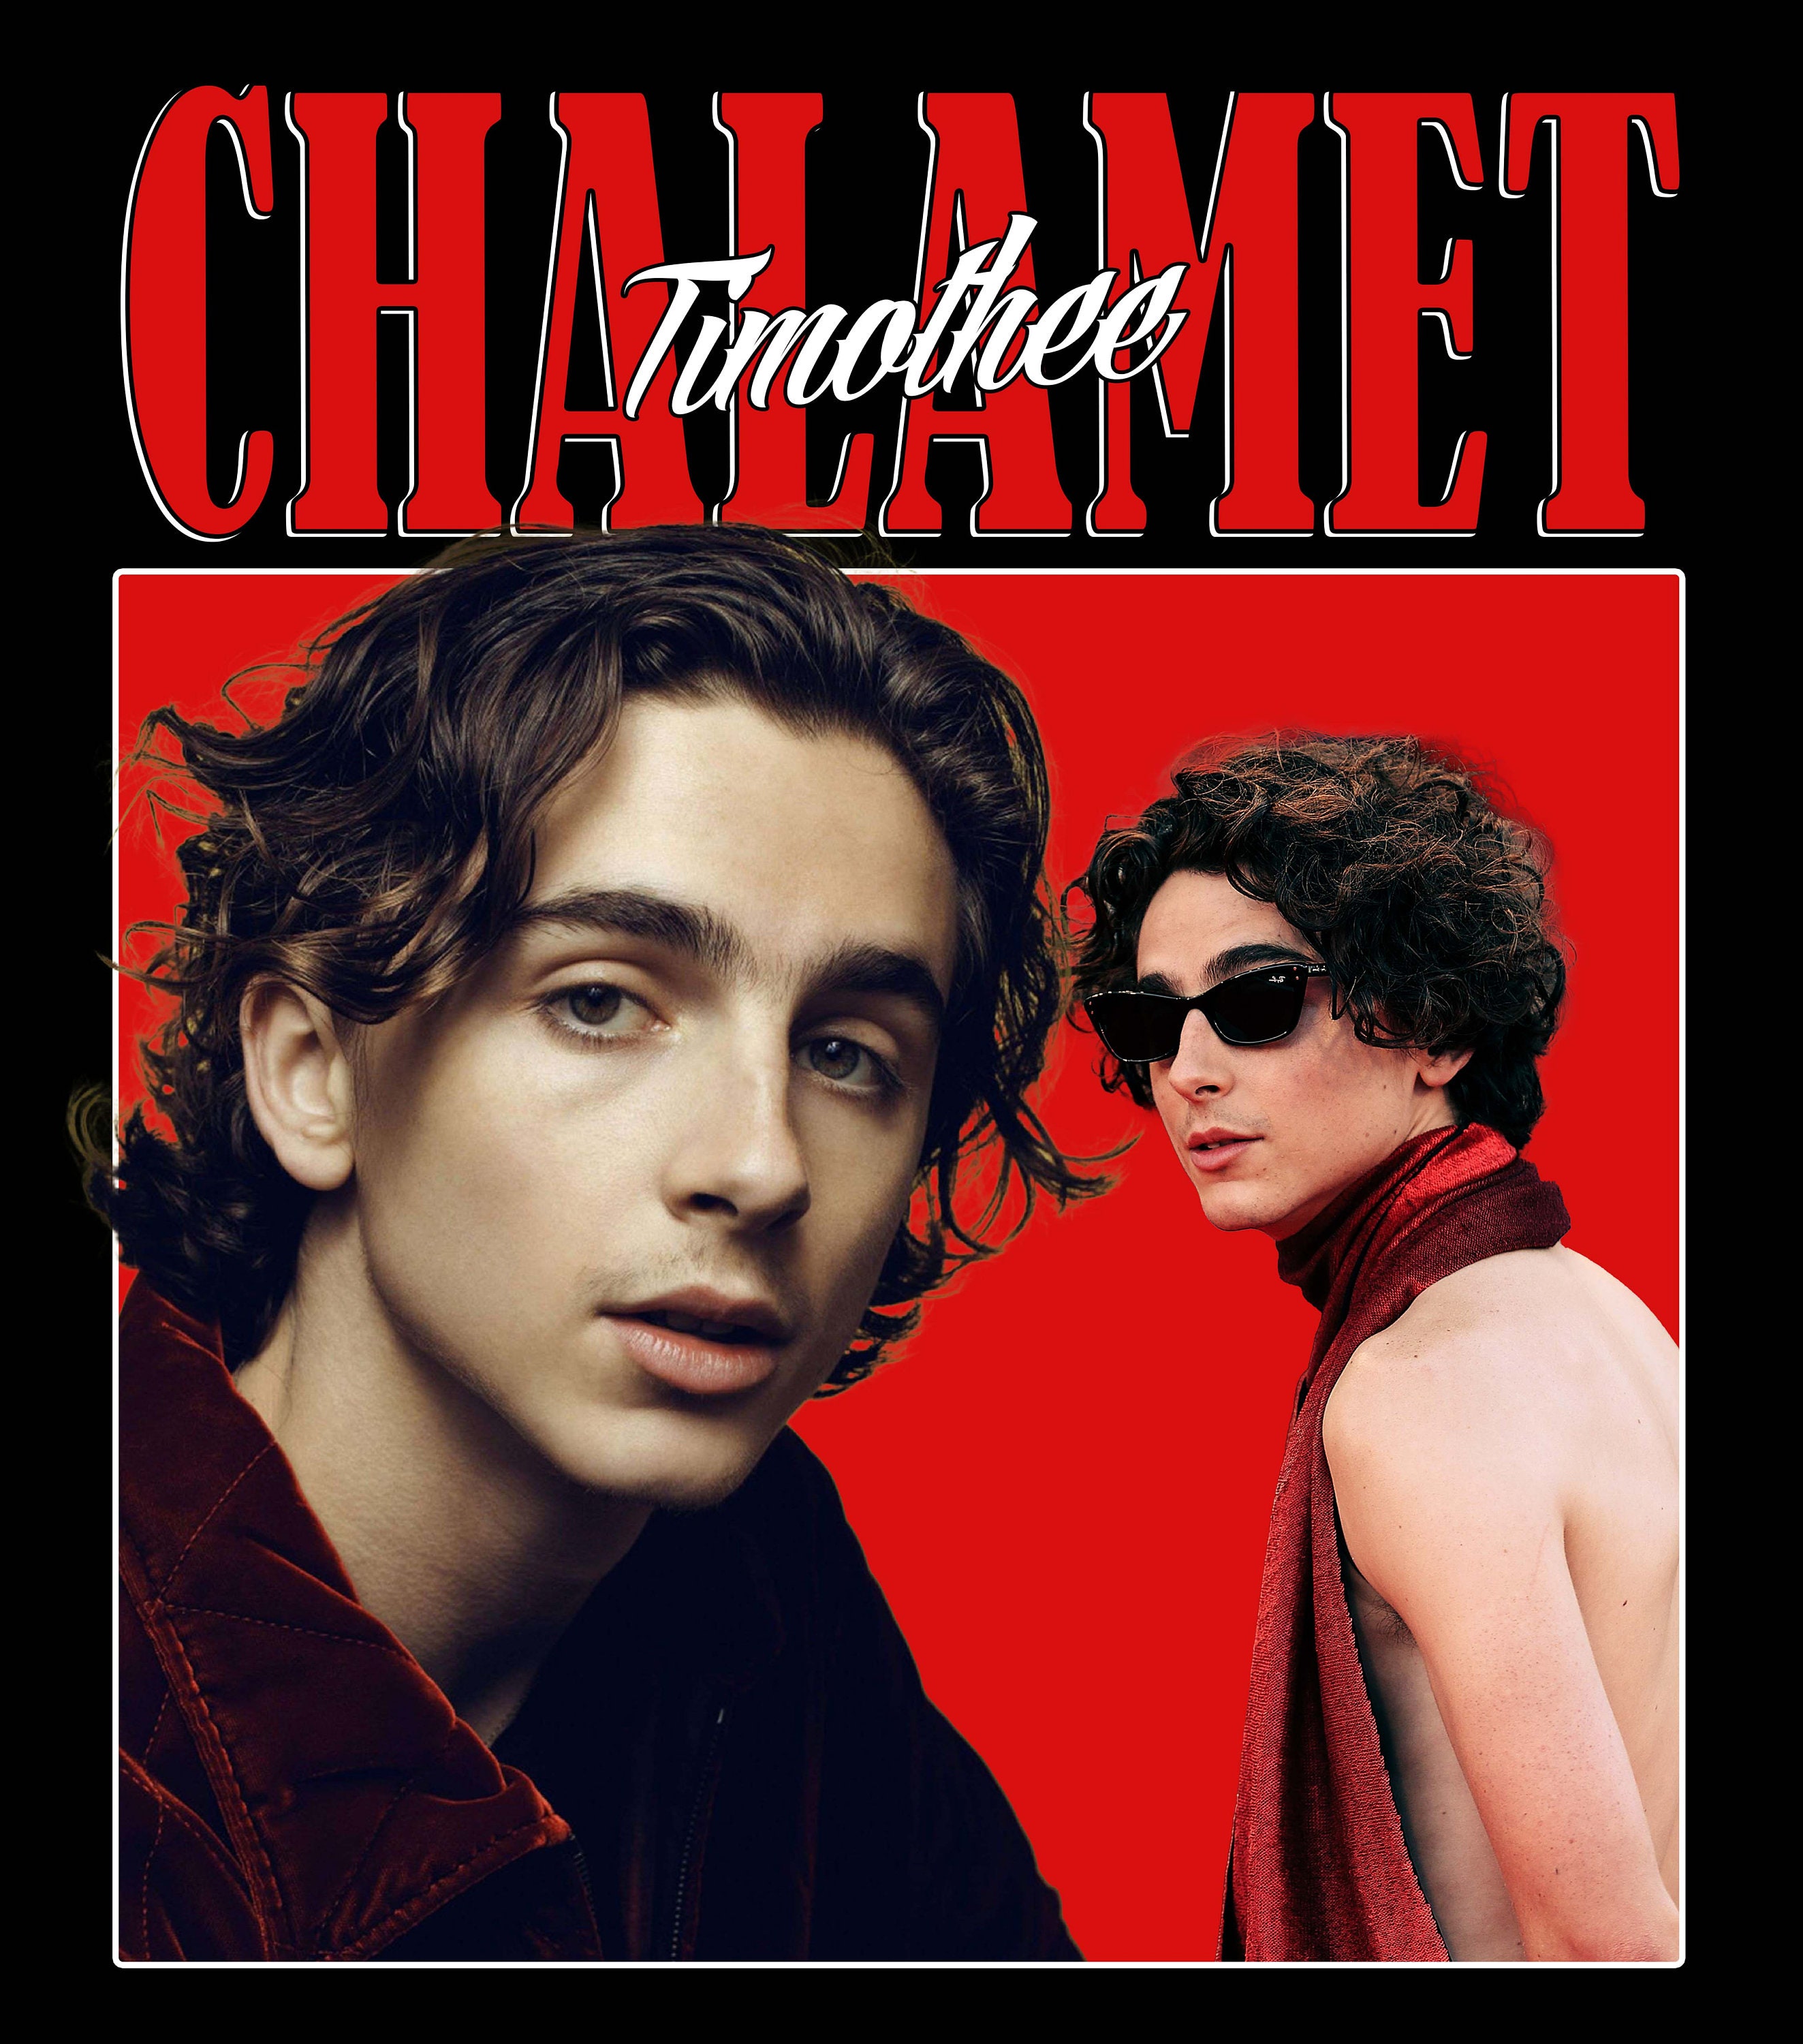 Timothee Chalamet Wrapping Paper- Pink Wrapping Paper- Timothee Chalamet  Gift Wrap